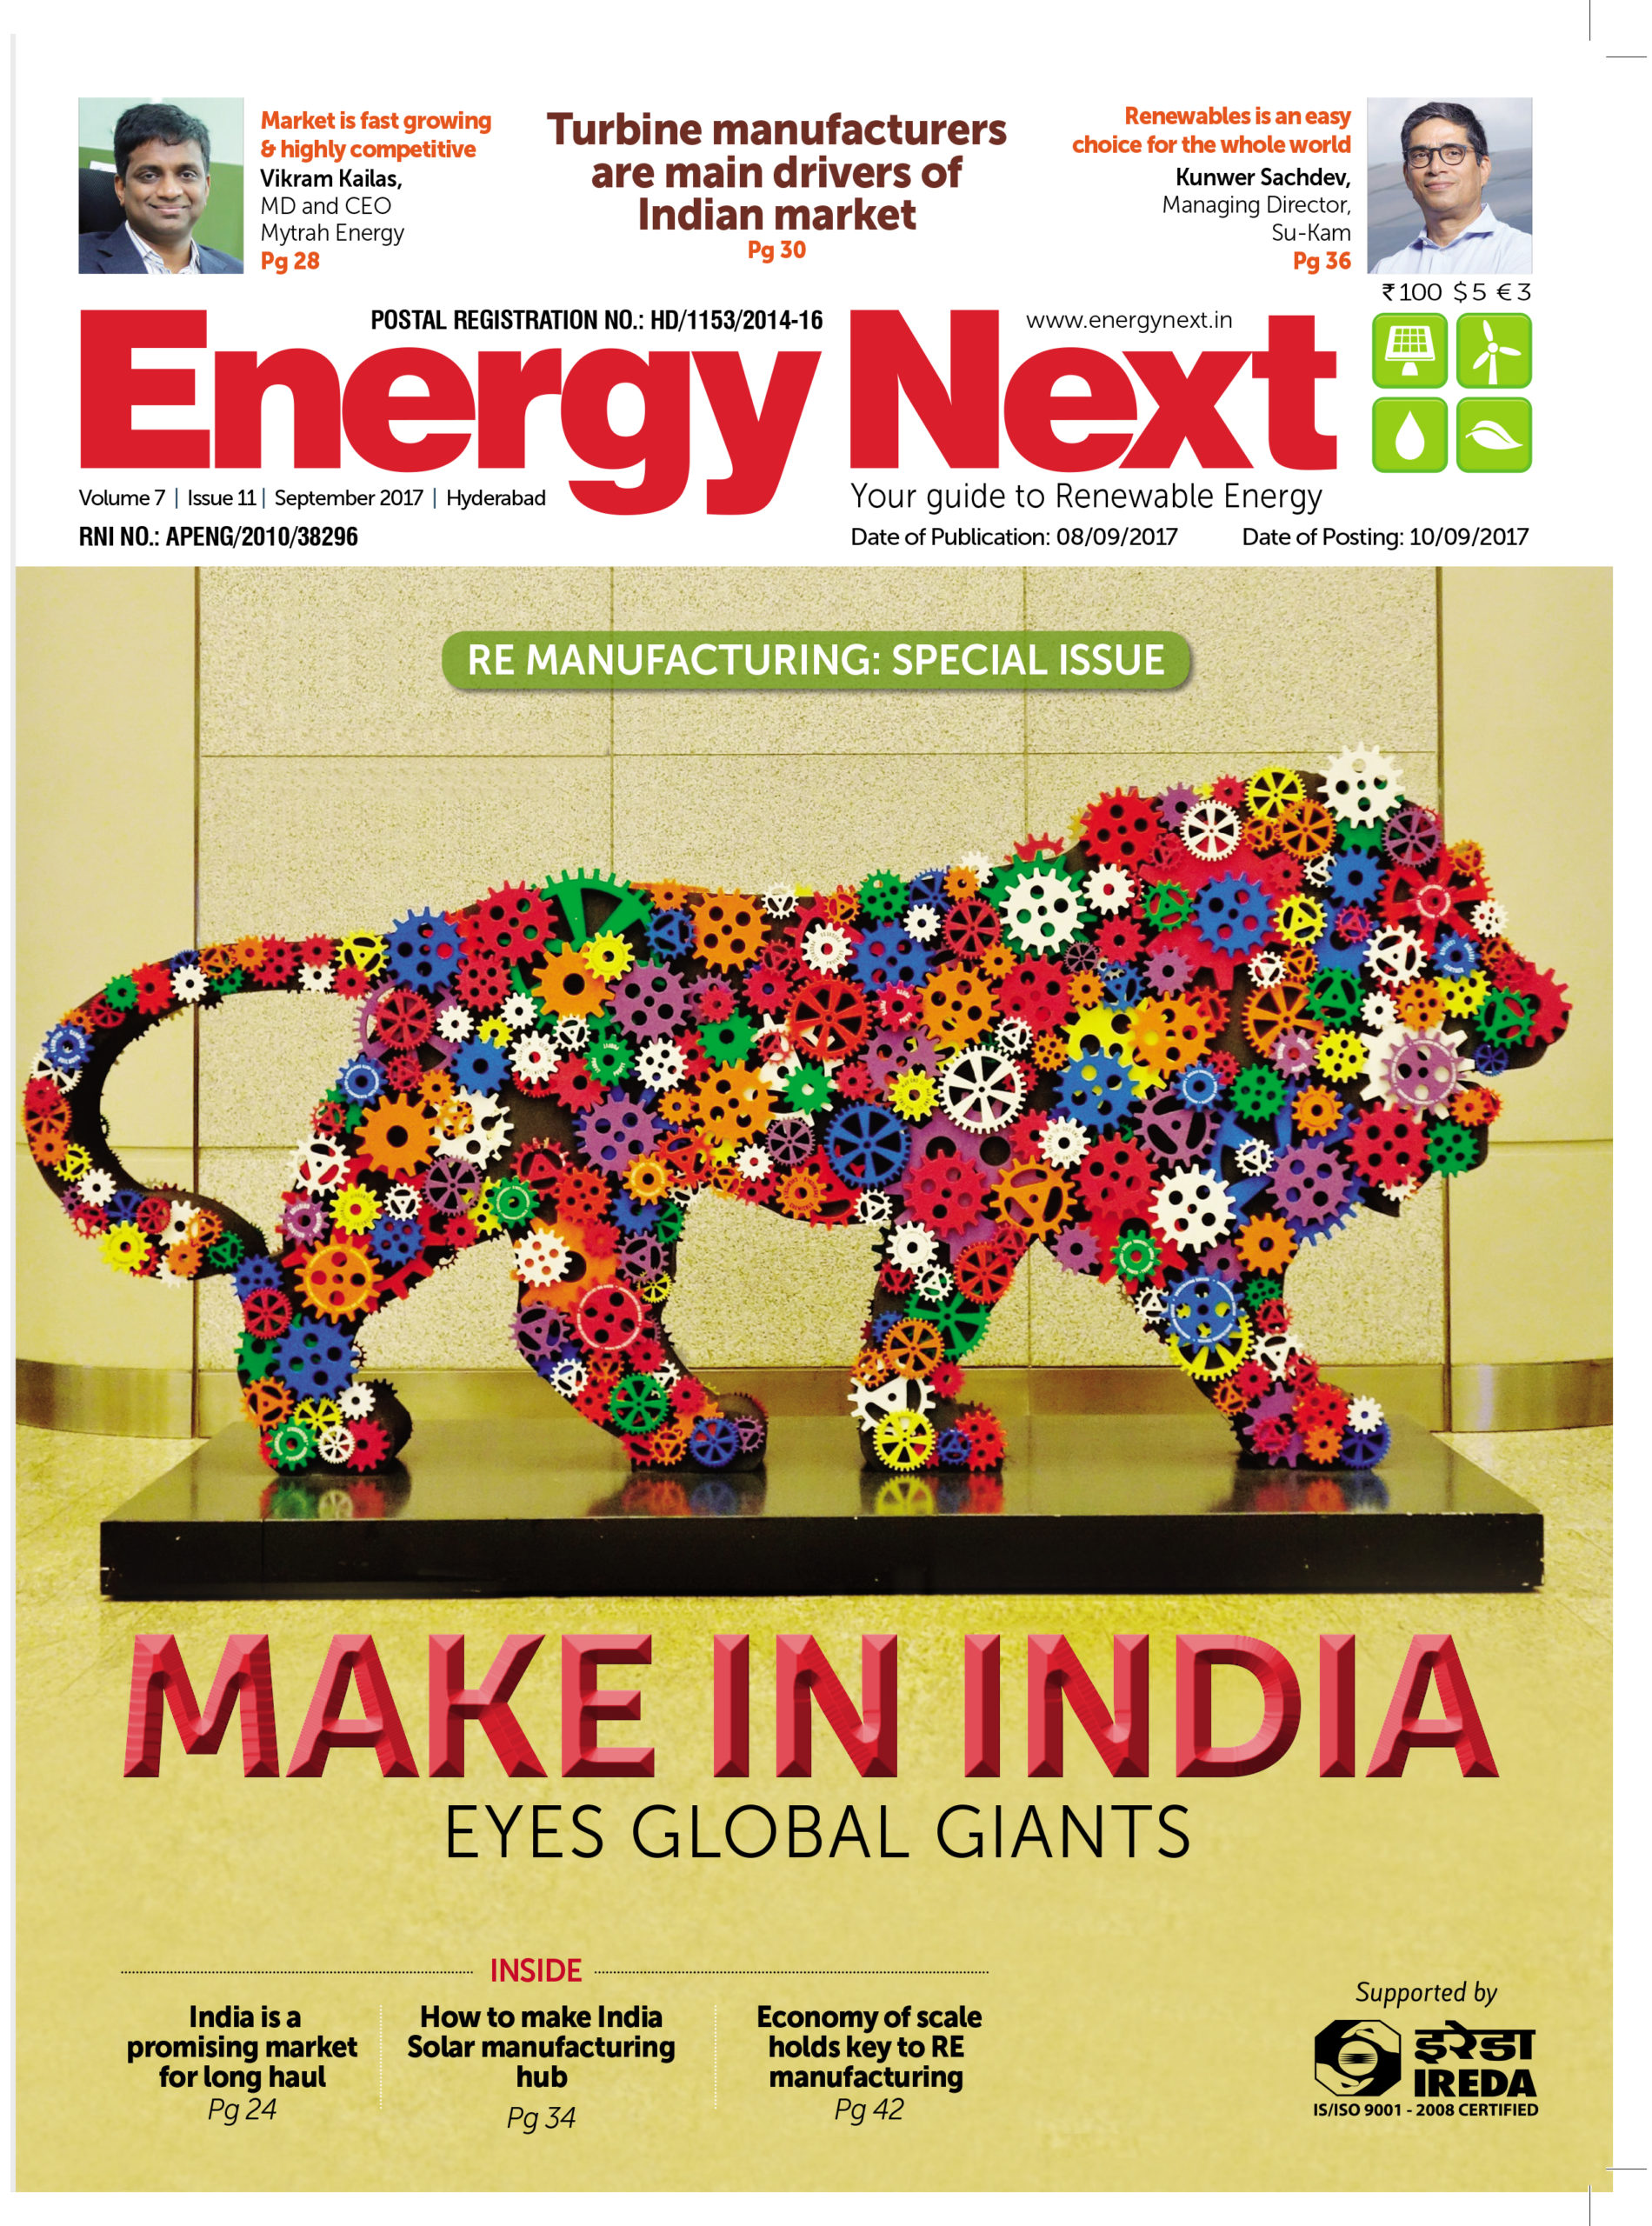 EnergyNext volume 7 issue 11 Sept 2017 scaled